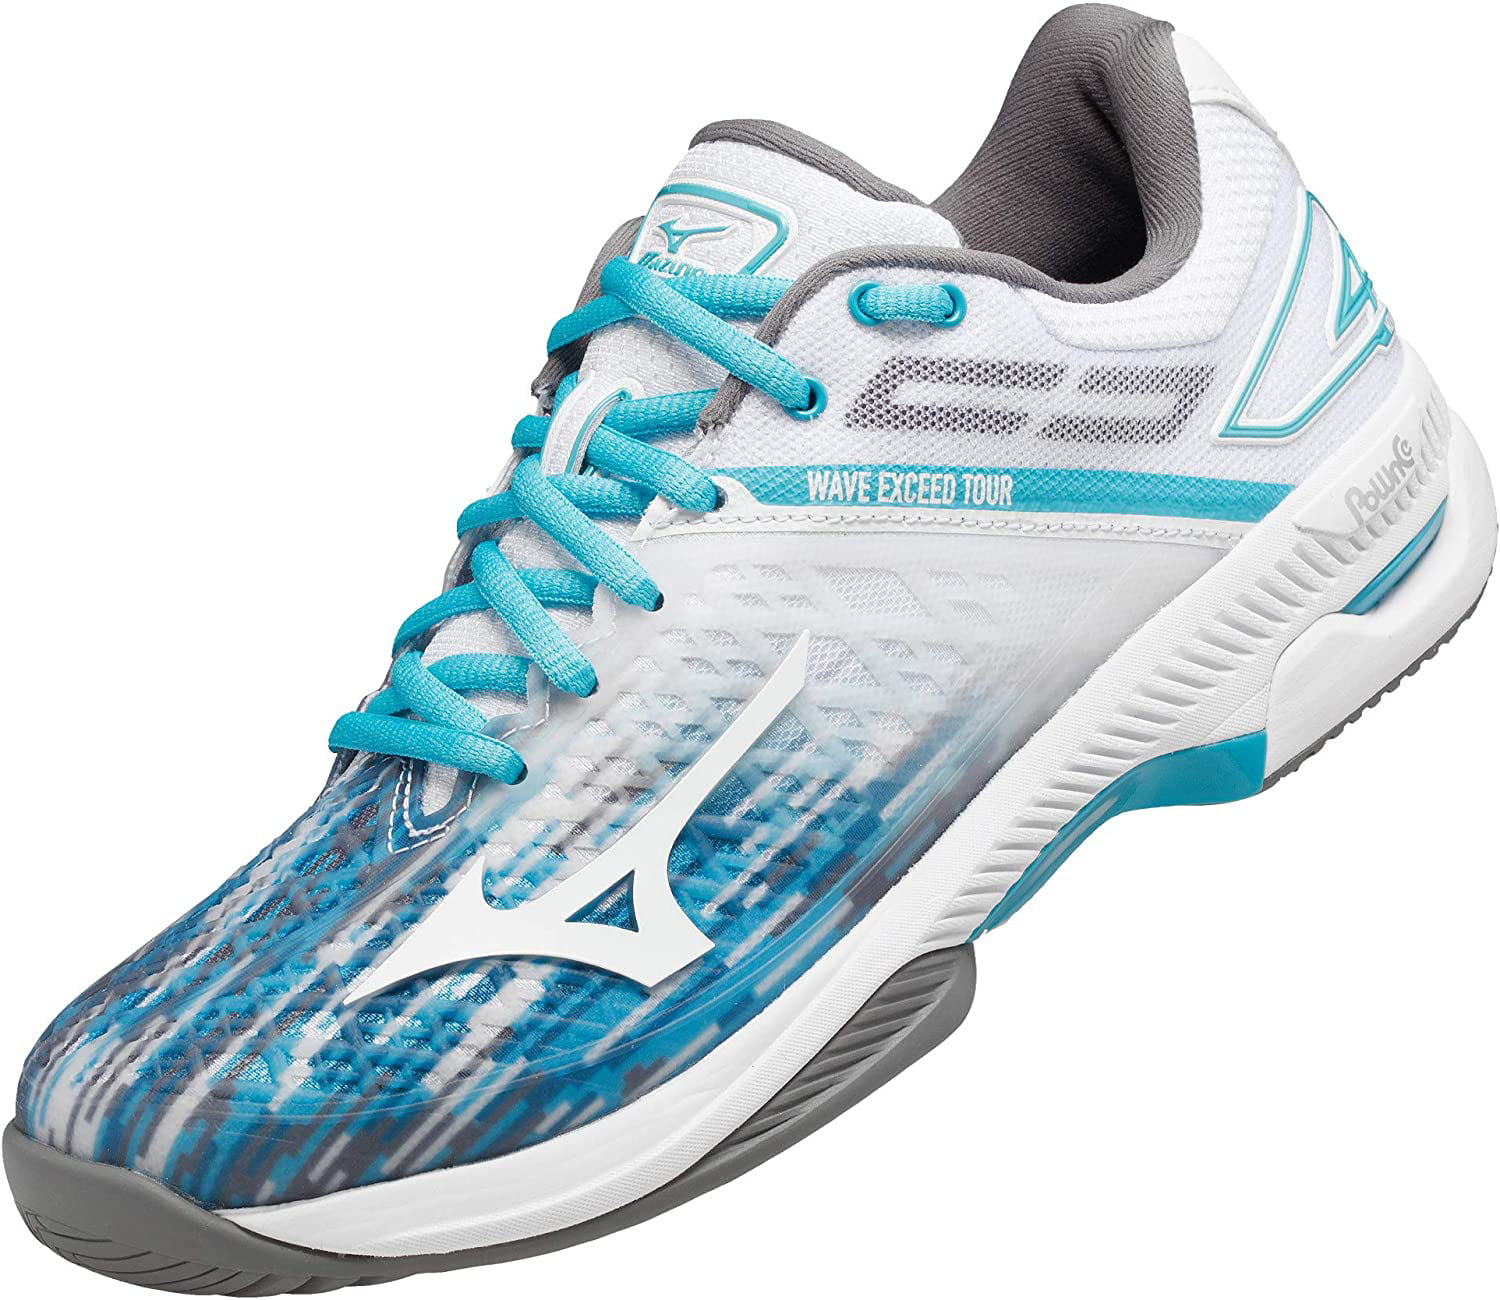 Mizuno Womens Wave Exceed Tour 4 AC Tennis Shoes Blue White Sports Breathable 